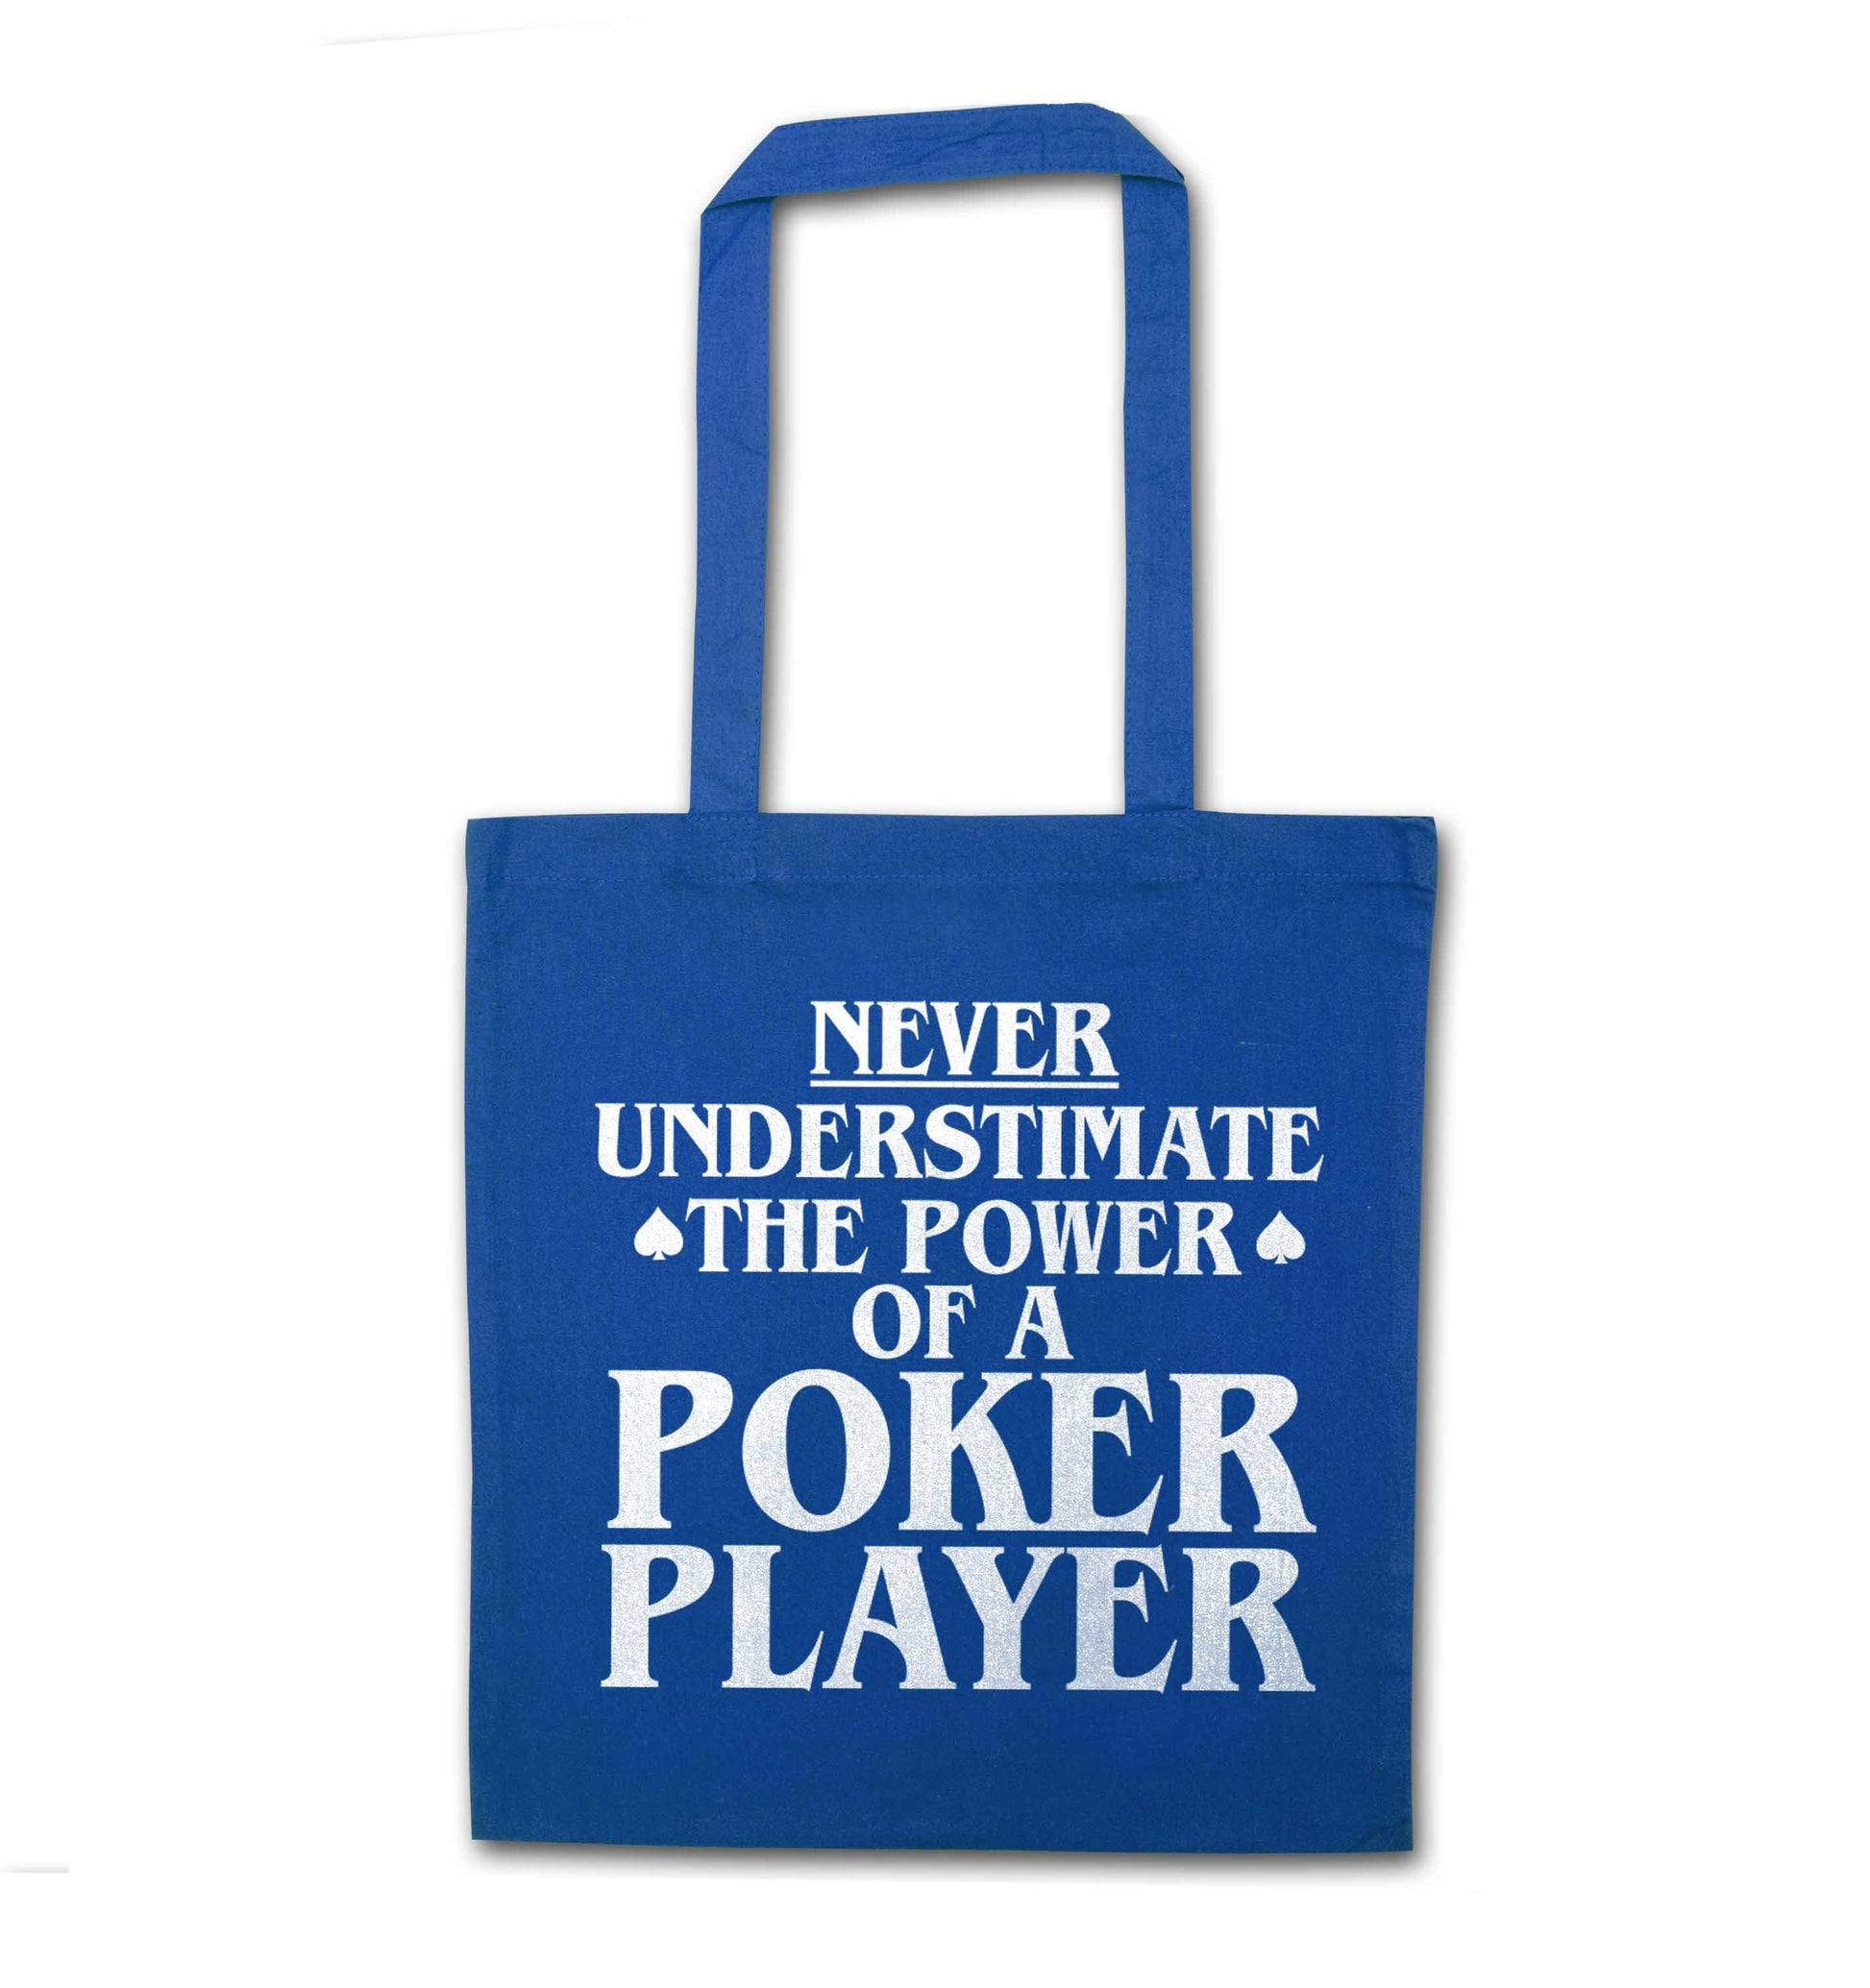 Never understimate the power of a poker player blue tote bag